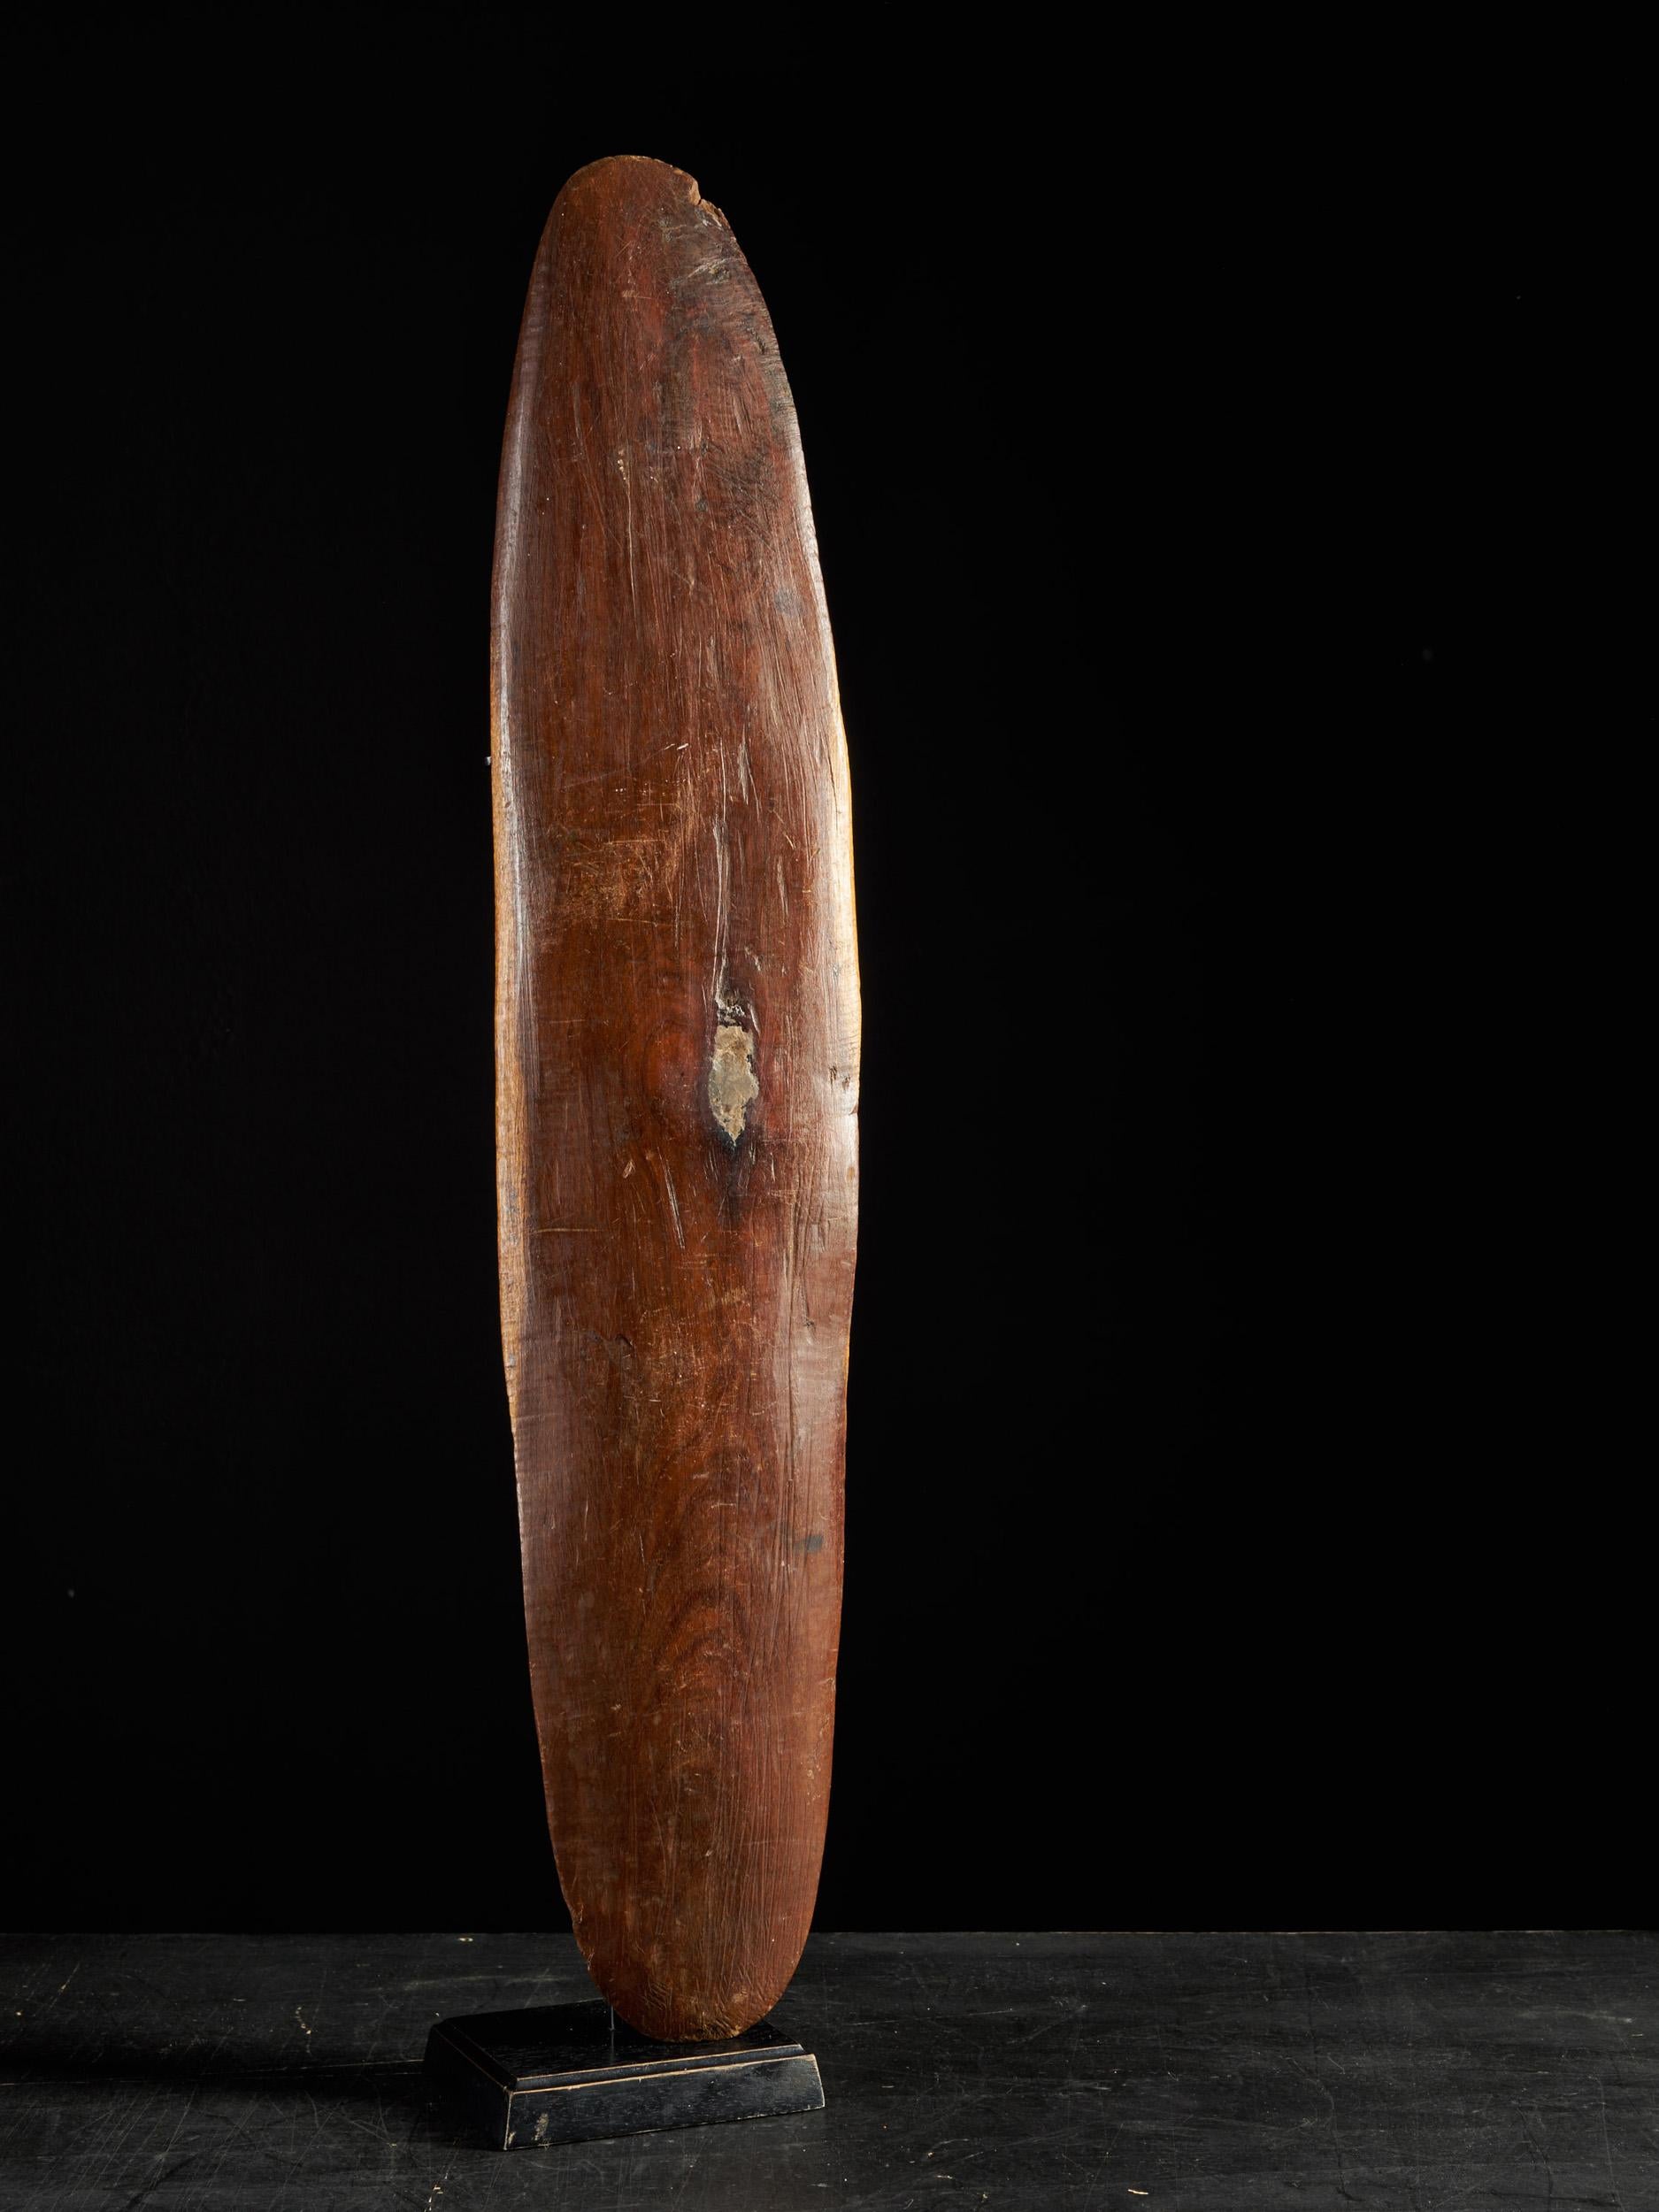 Hand-Carved Set of Australian Aboriginal Items with Spear Thrower, Shield and Boomerang